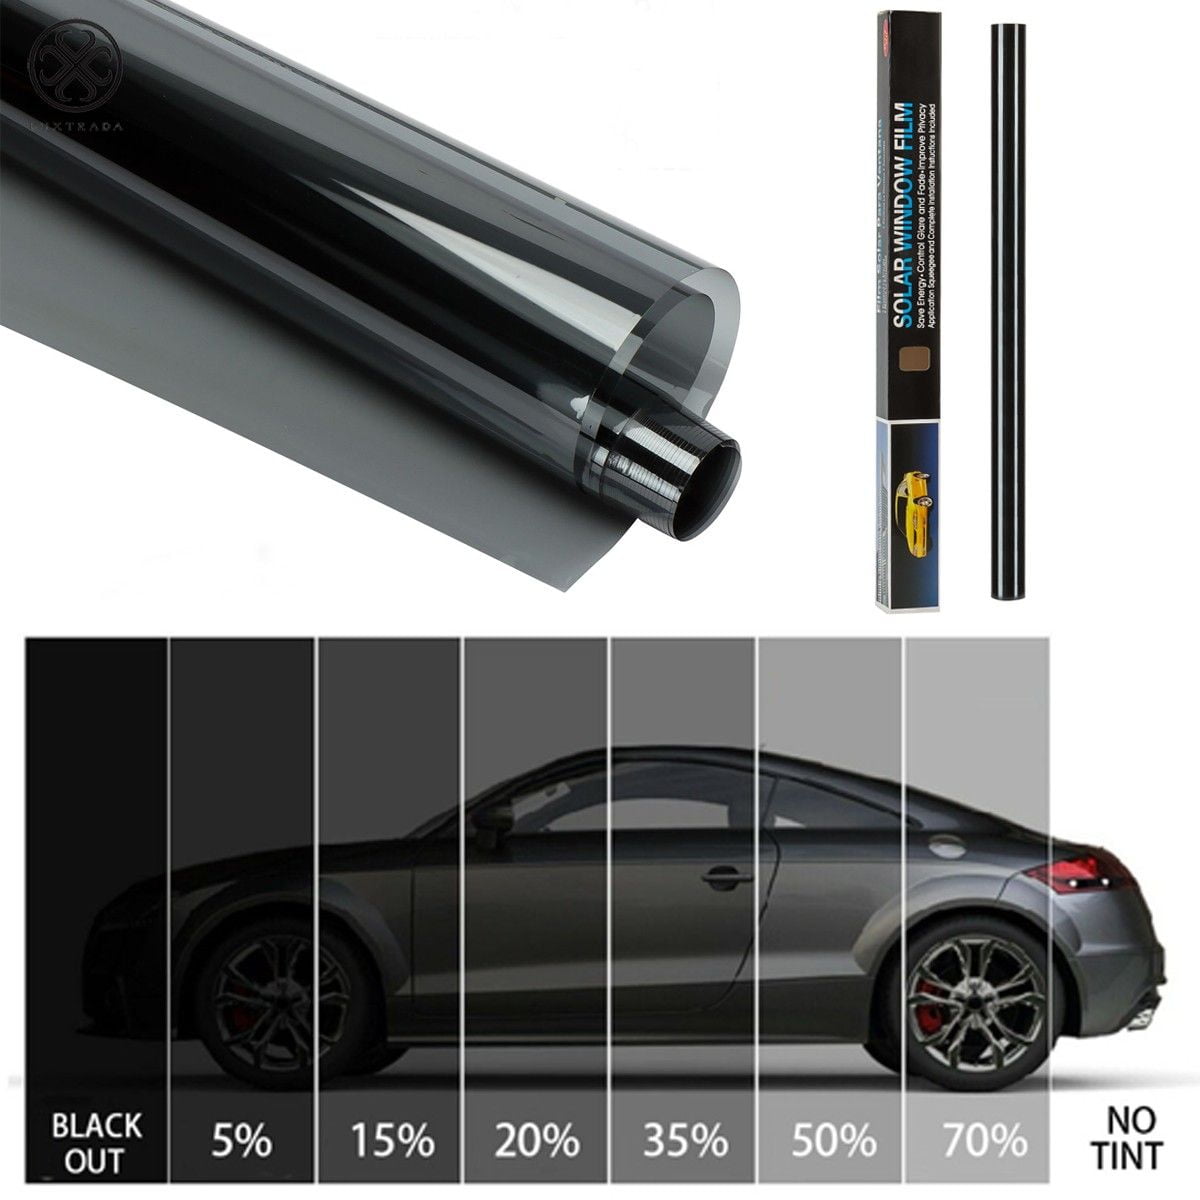 Black Magic Select 20% VLT Tinted Window Film, Car Window Tint,  Scratch-Resistant Tint Film, Privacy Film, Auto Tint Kit, 24-inches x  78-inches 